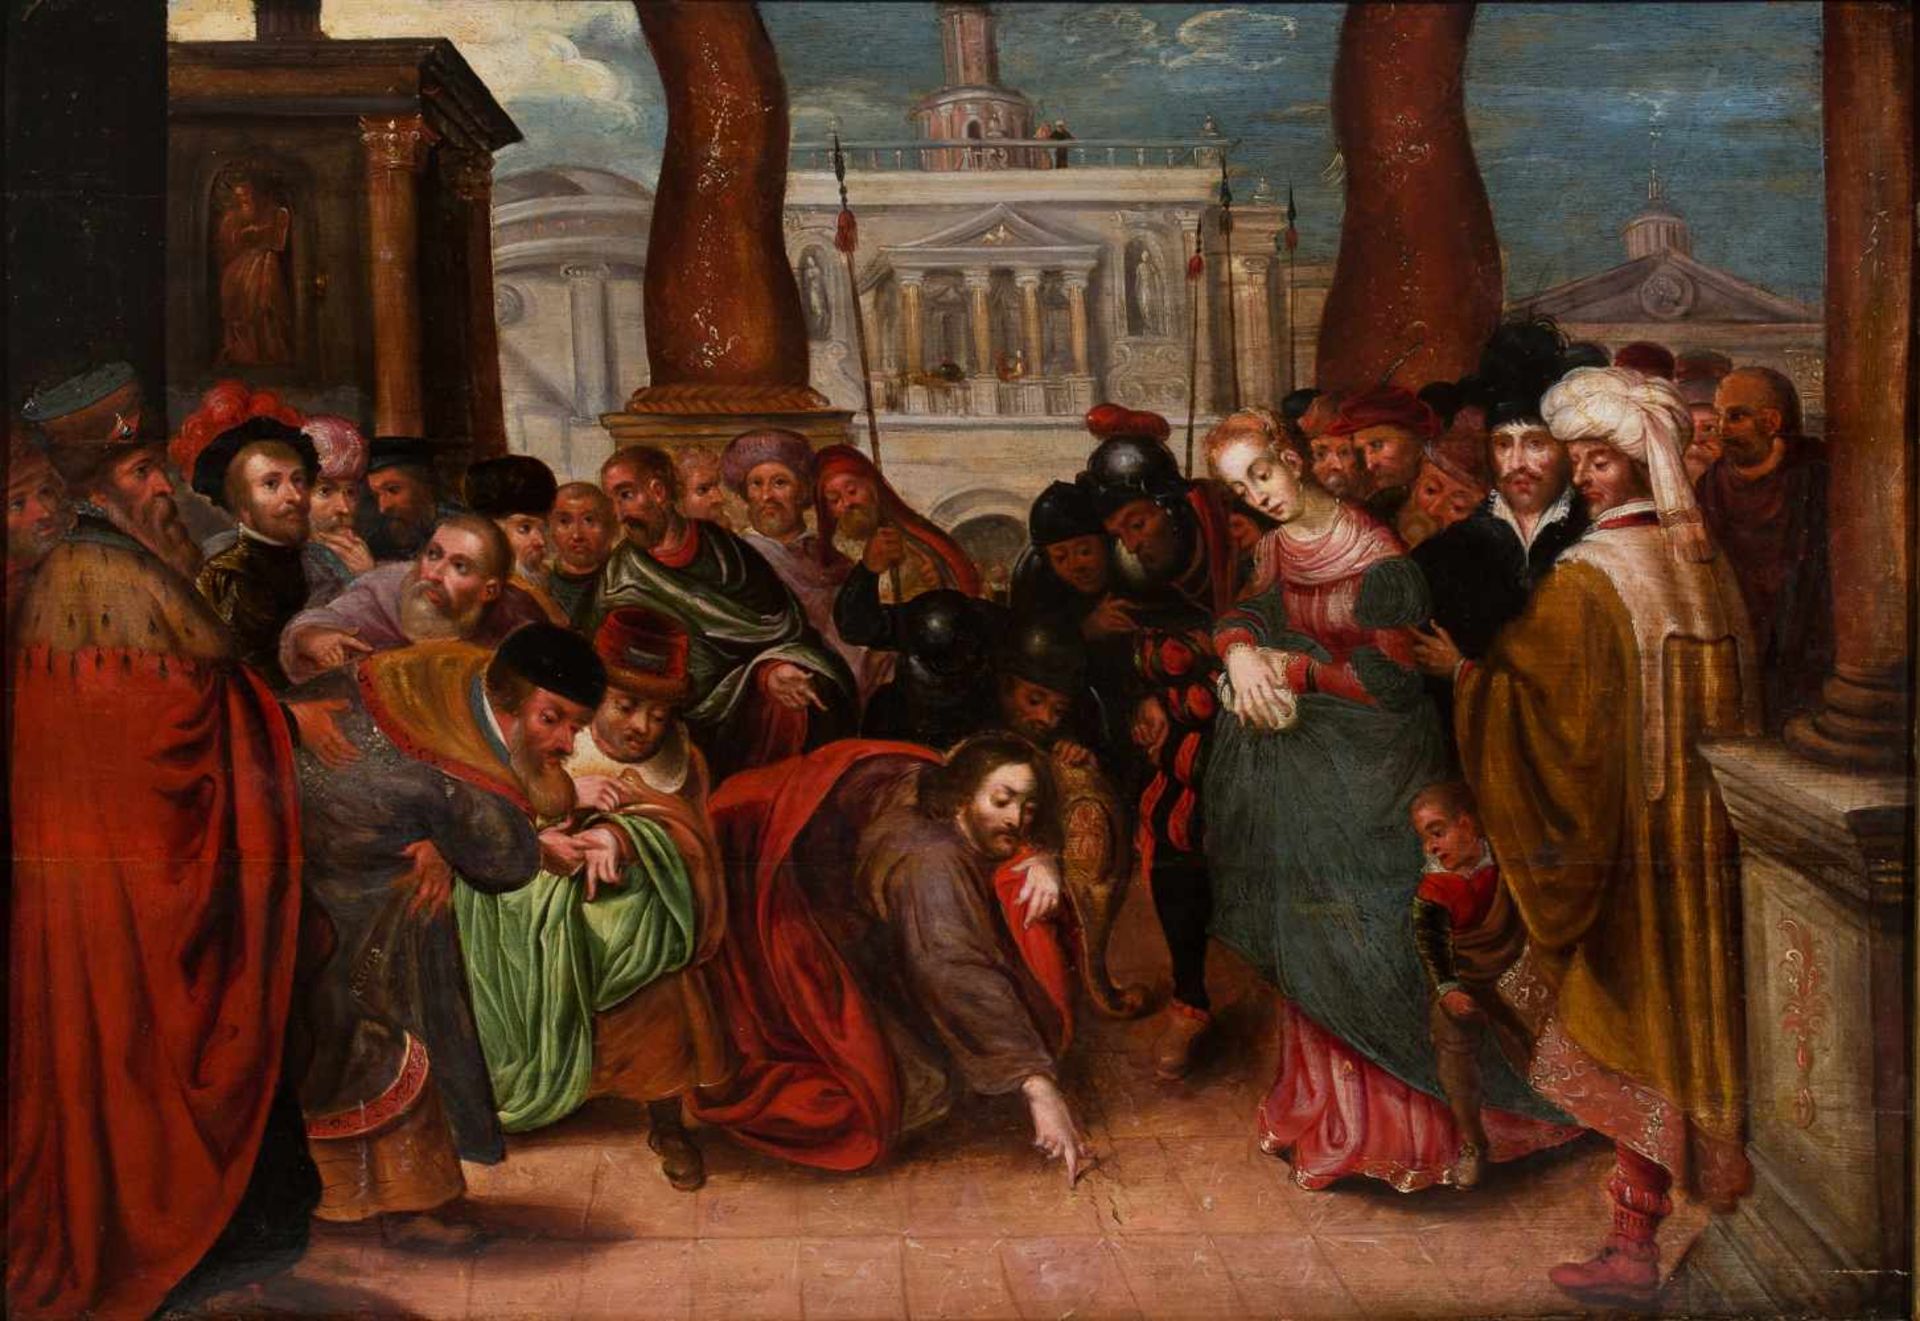 16th century Flemish School "Christ and the adulteress" Oil panel painting. 73 x 104 cm.